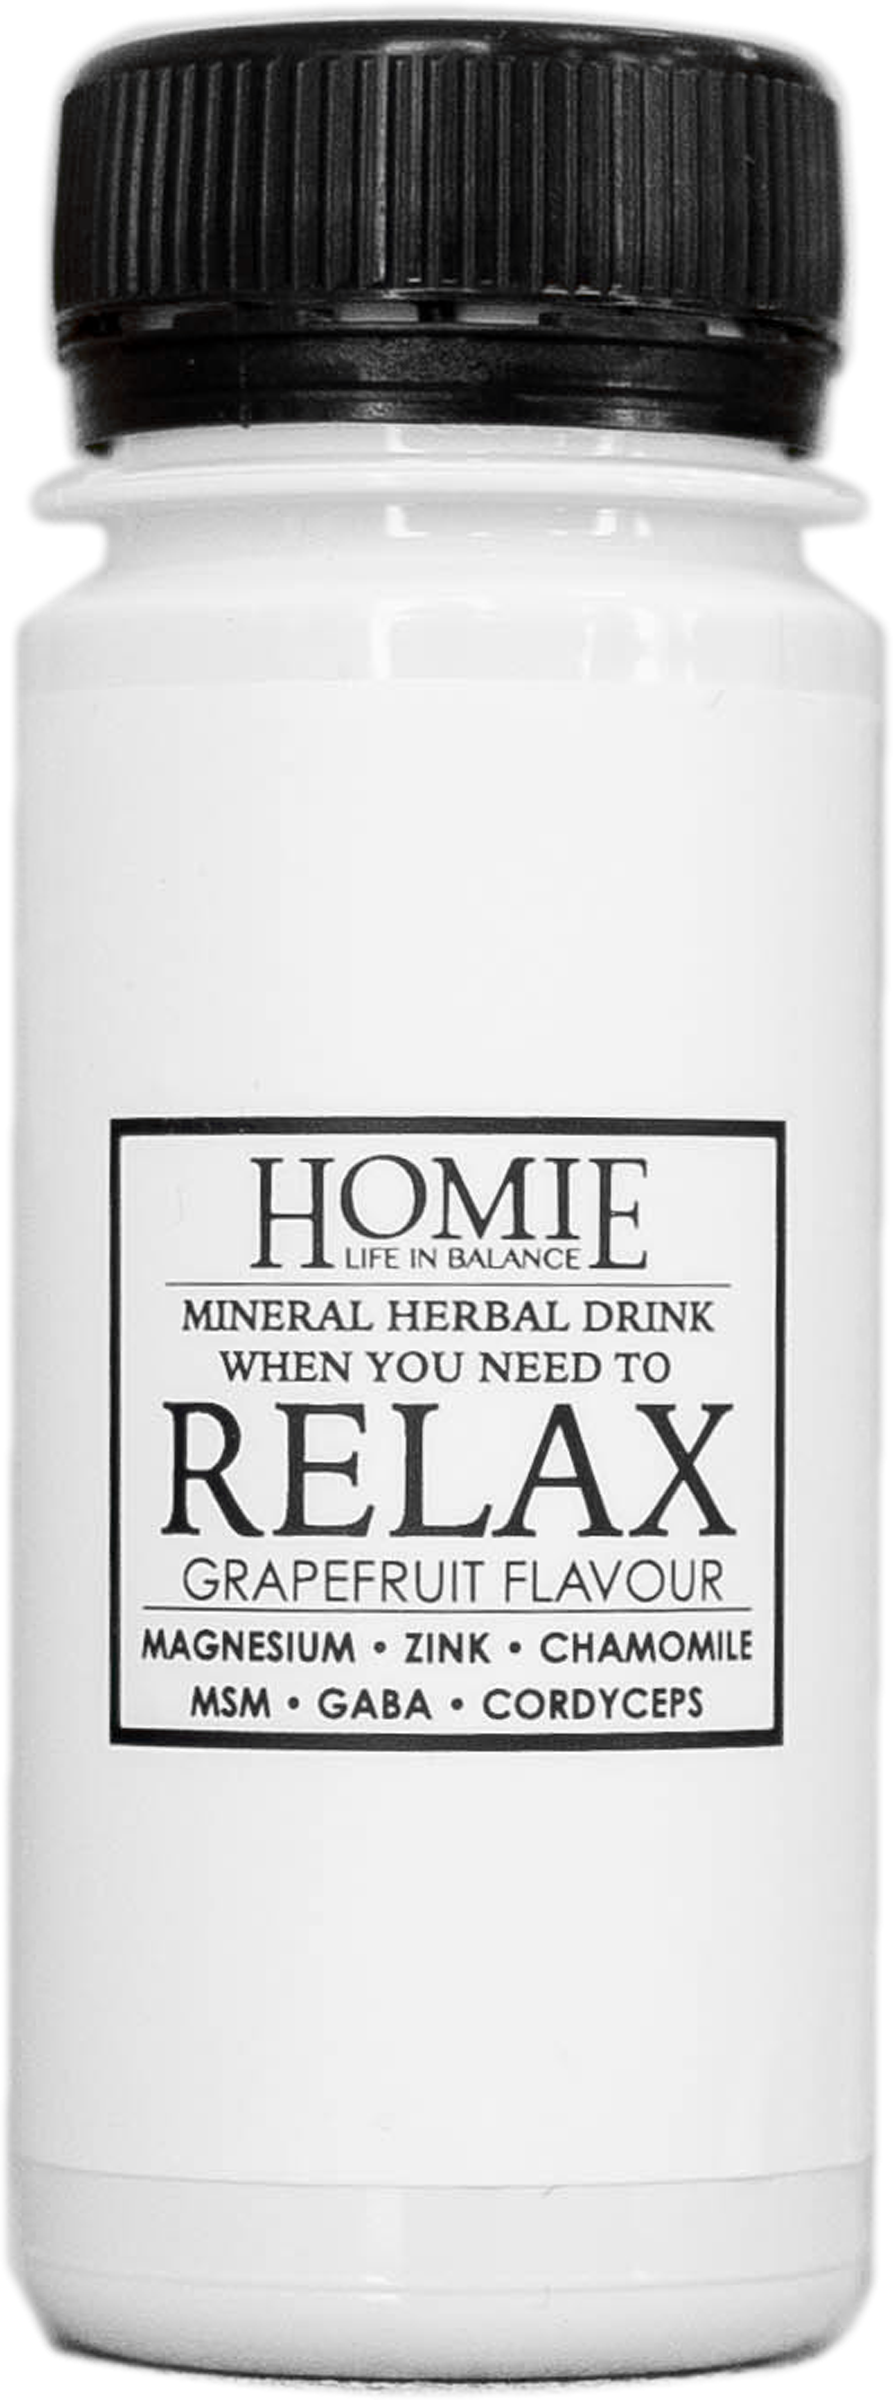 Homie Life in Balance Relax 60 ml